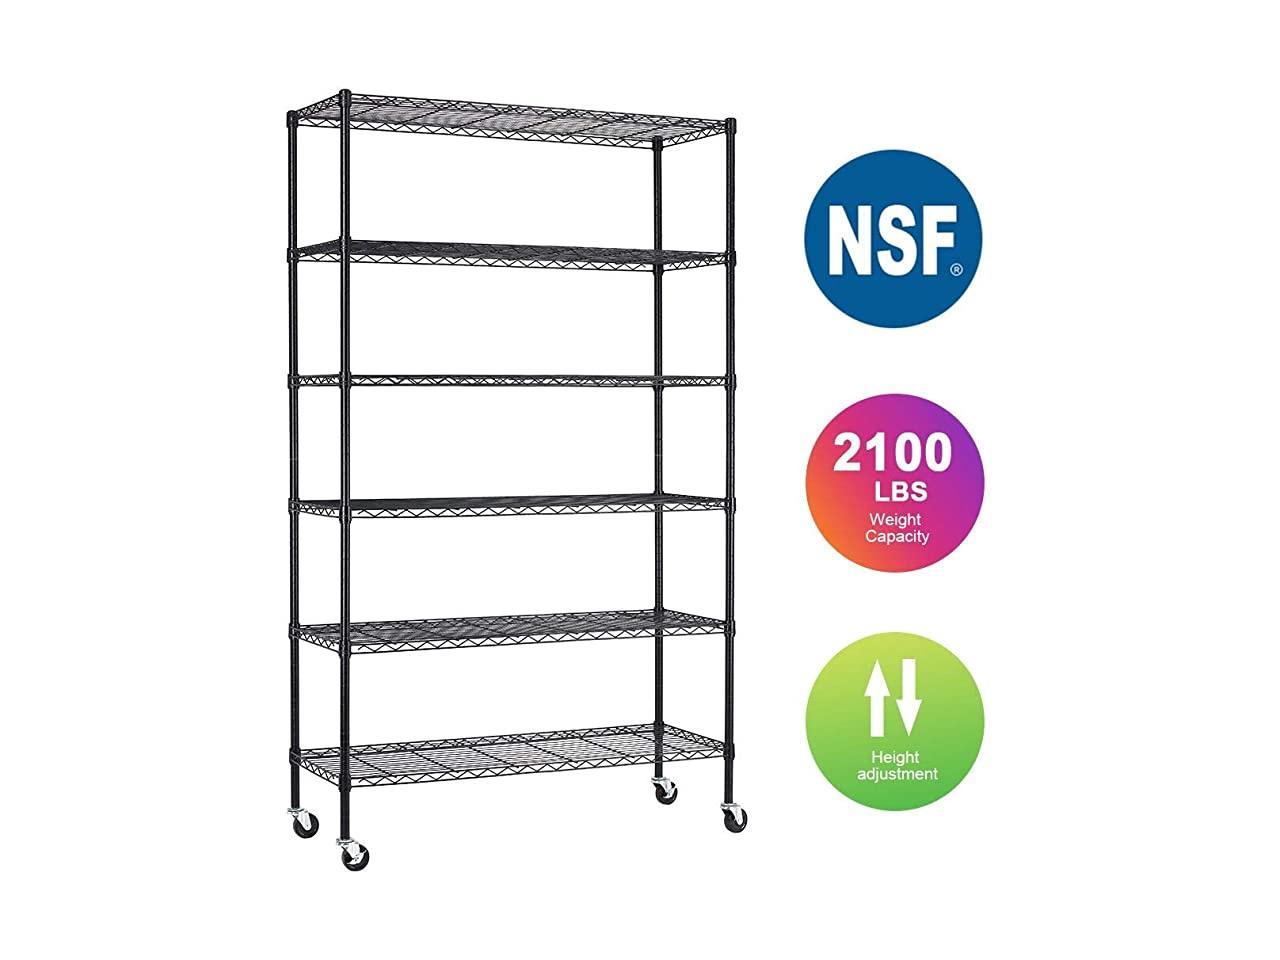 Black Storage Shelving Rack,Kitchen/Office Rack 6 Tier Wire Shelving Rack,Steel Shelf 48 W x 18 D x 82 H Adjustable Storage System With Casters/Wheels And Feet Levelers,Garage Shelving Unit 